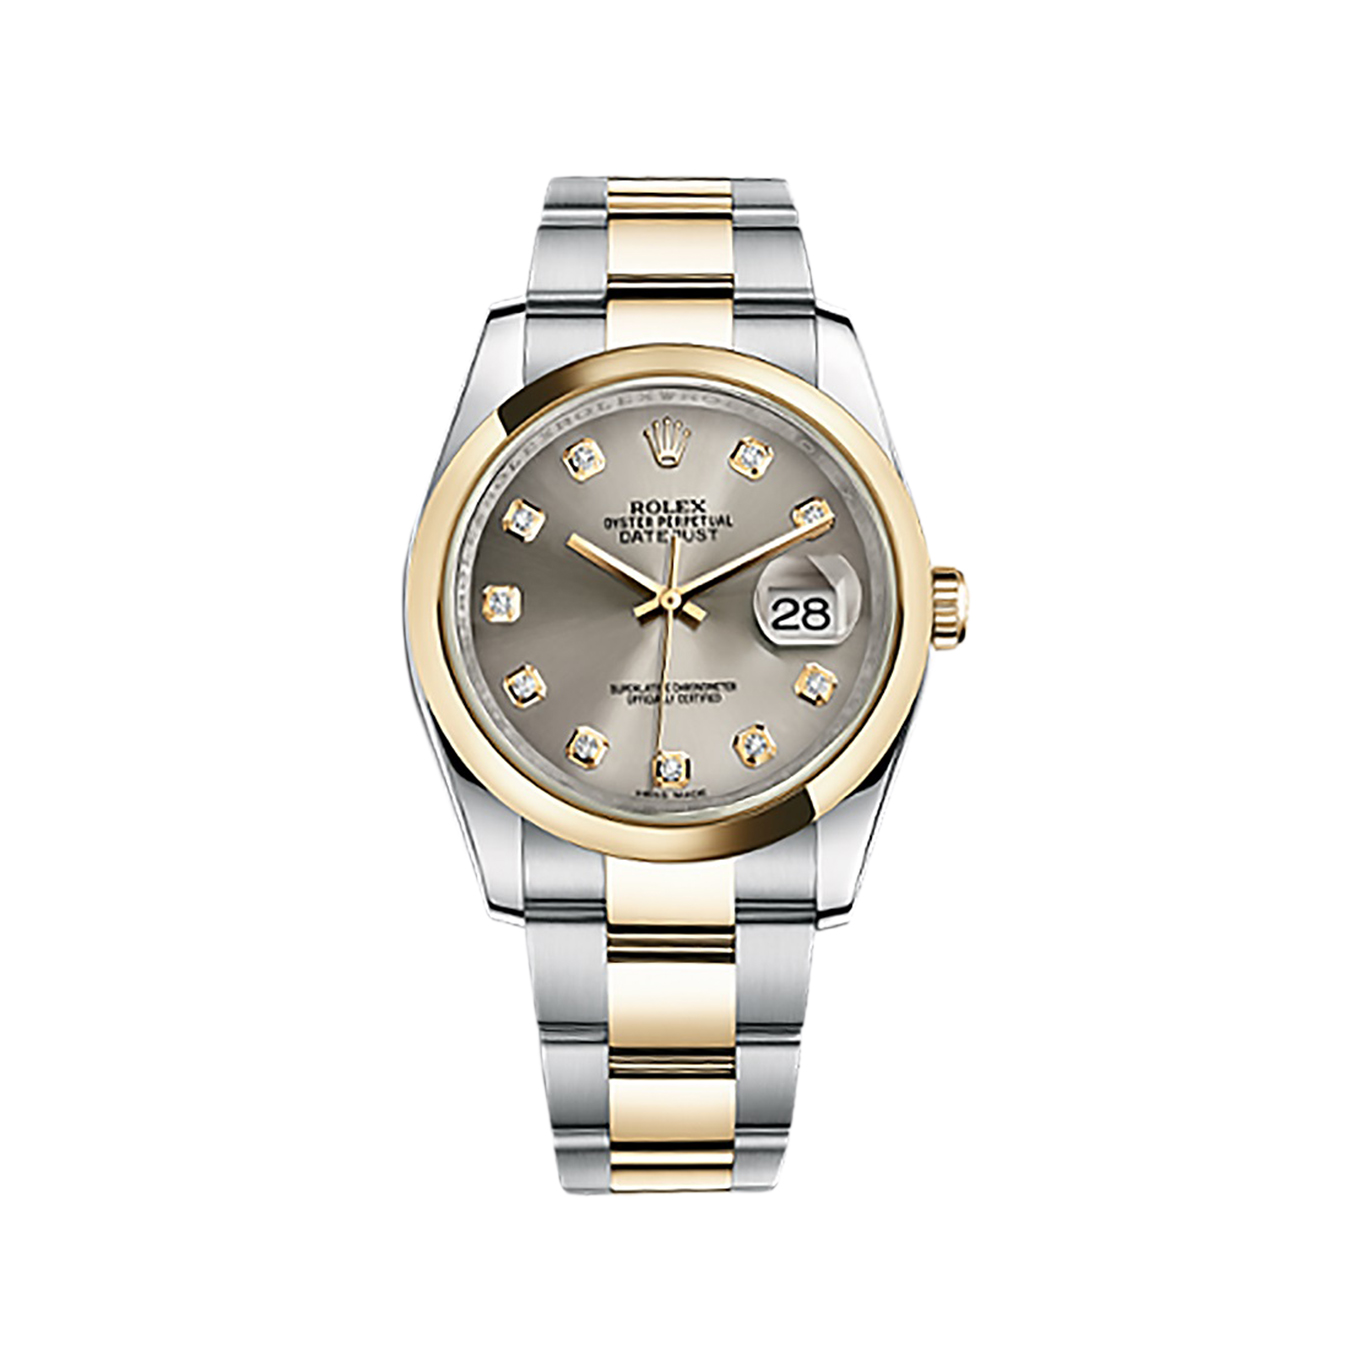 Datejust 36 116203 Gold & Stainless Steel Watch (Steel Set with Diamonds) - Click Image to Close